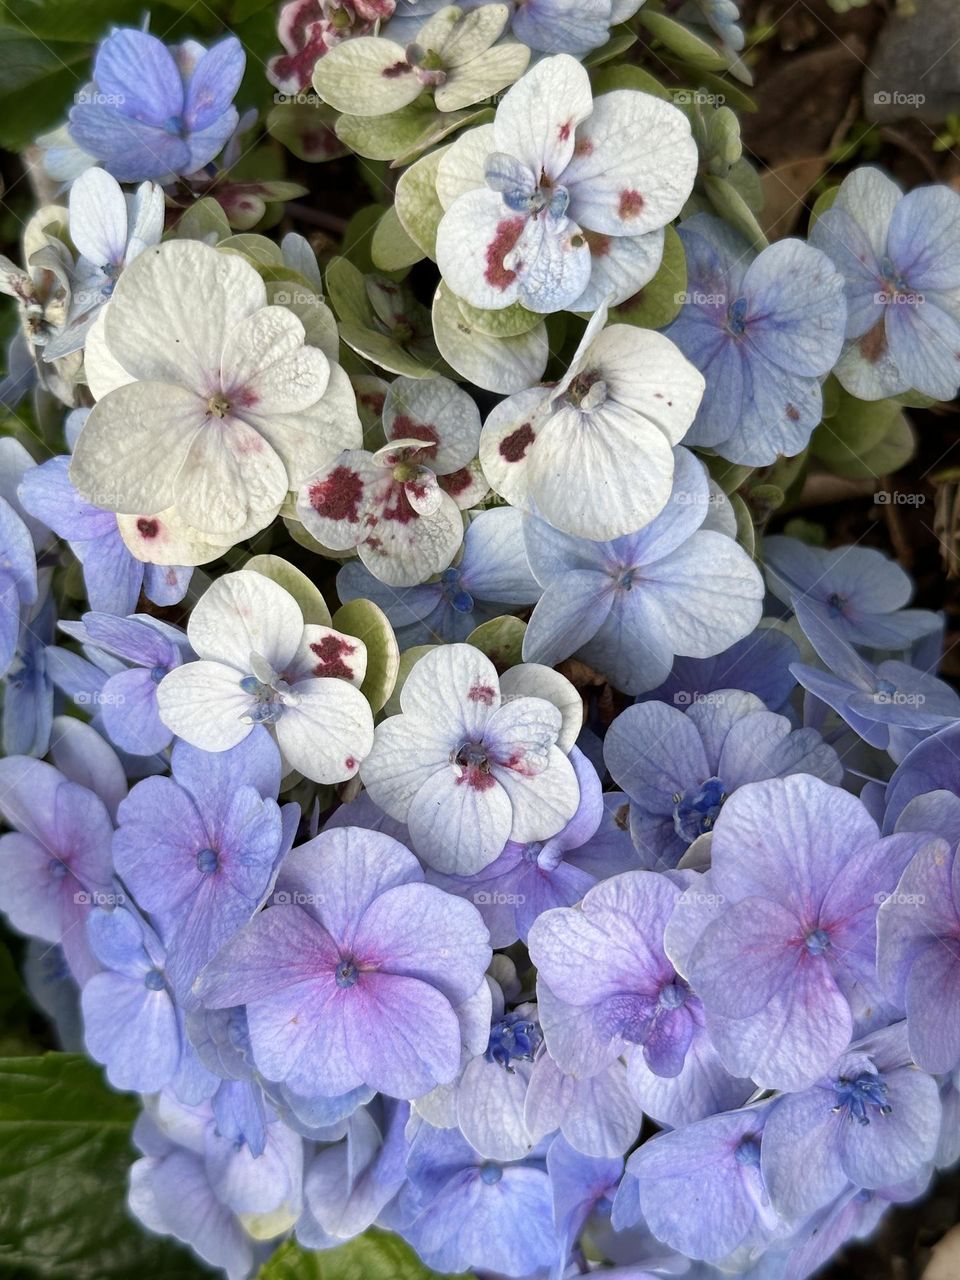 Looking down on a detailed view of light lavender and white Hydrangea petals in the garden.